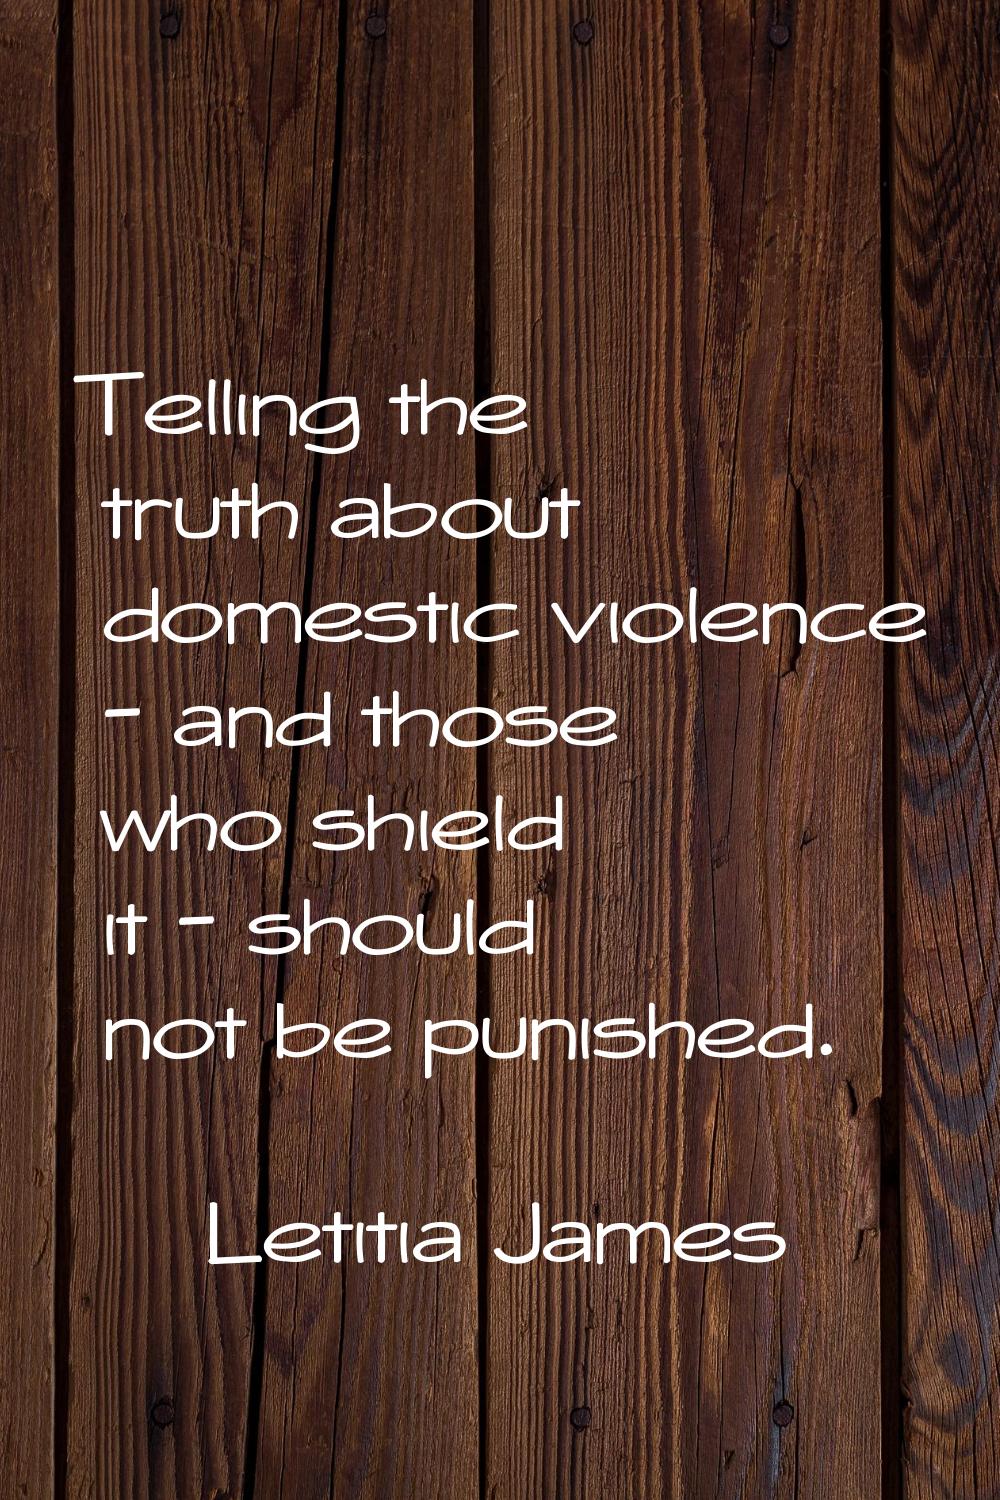 Telling the truth about domestic violence - and those who shield it - should not be punished.